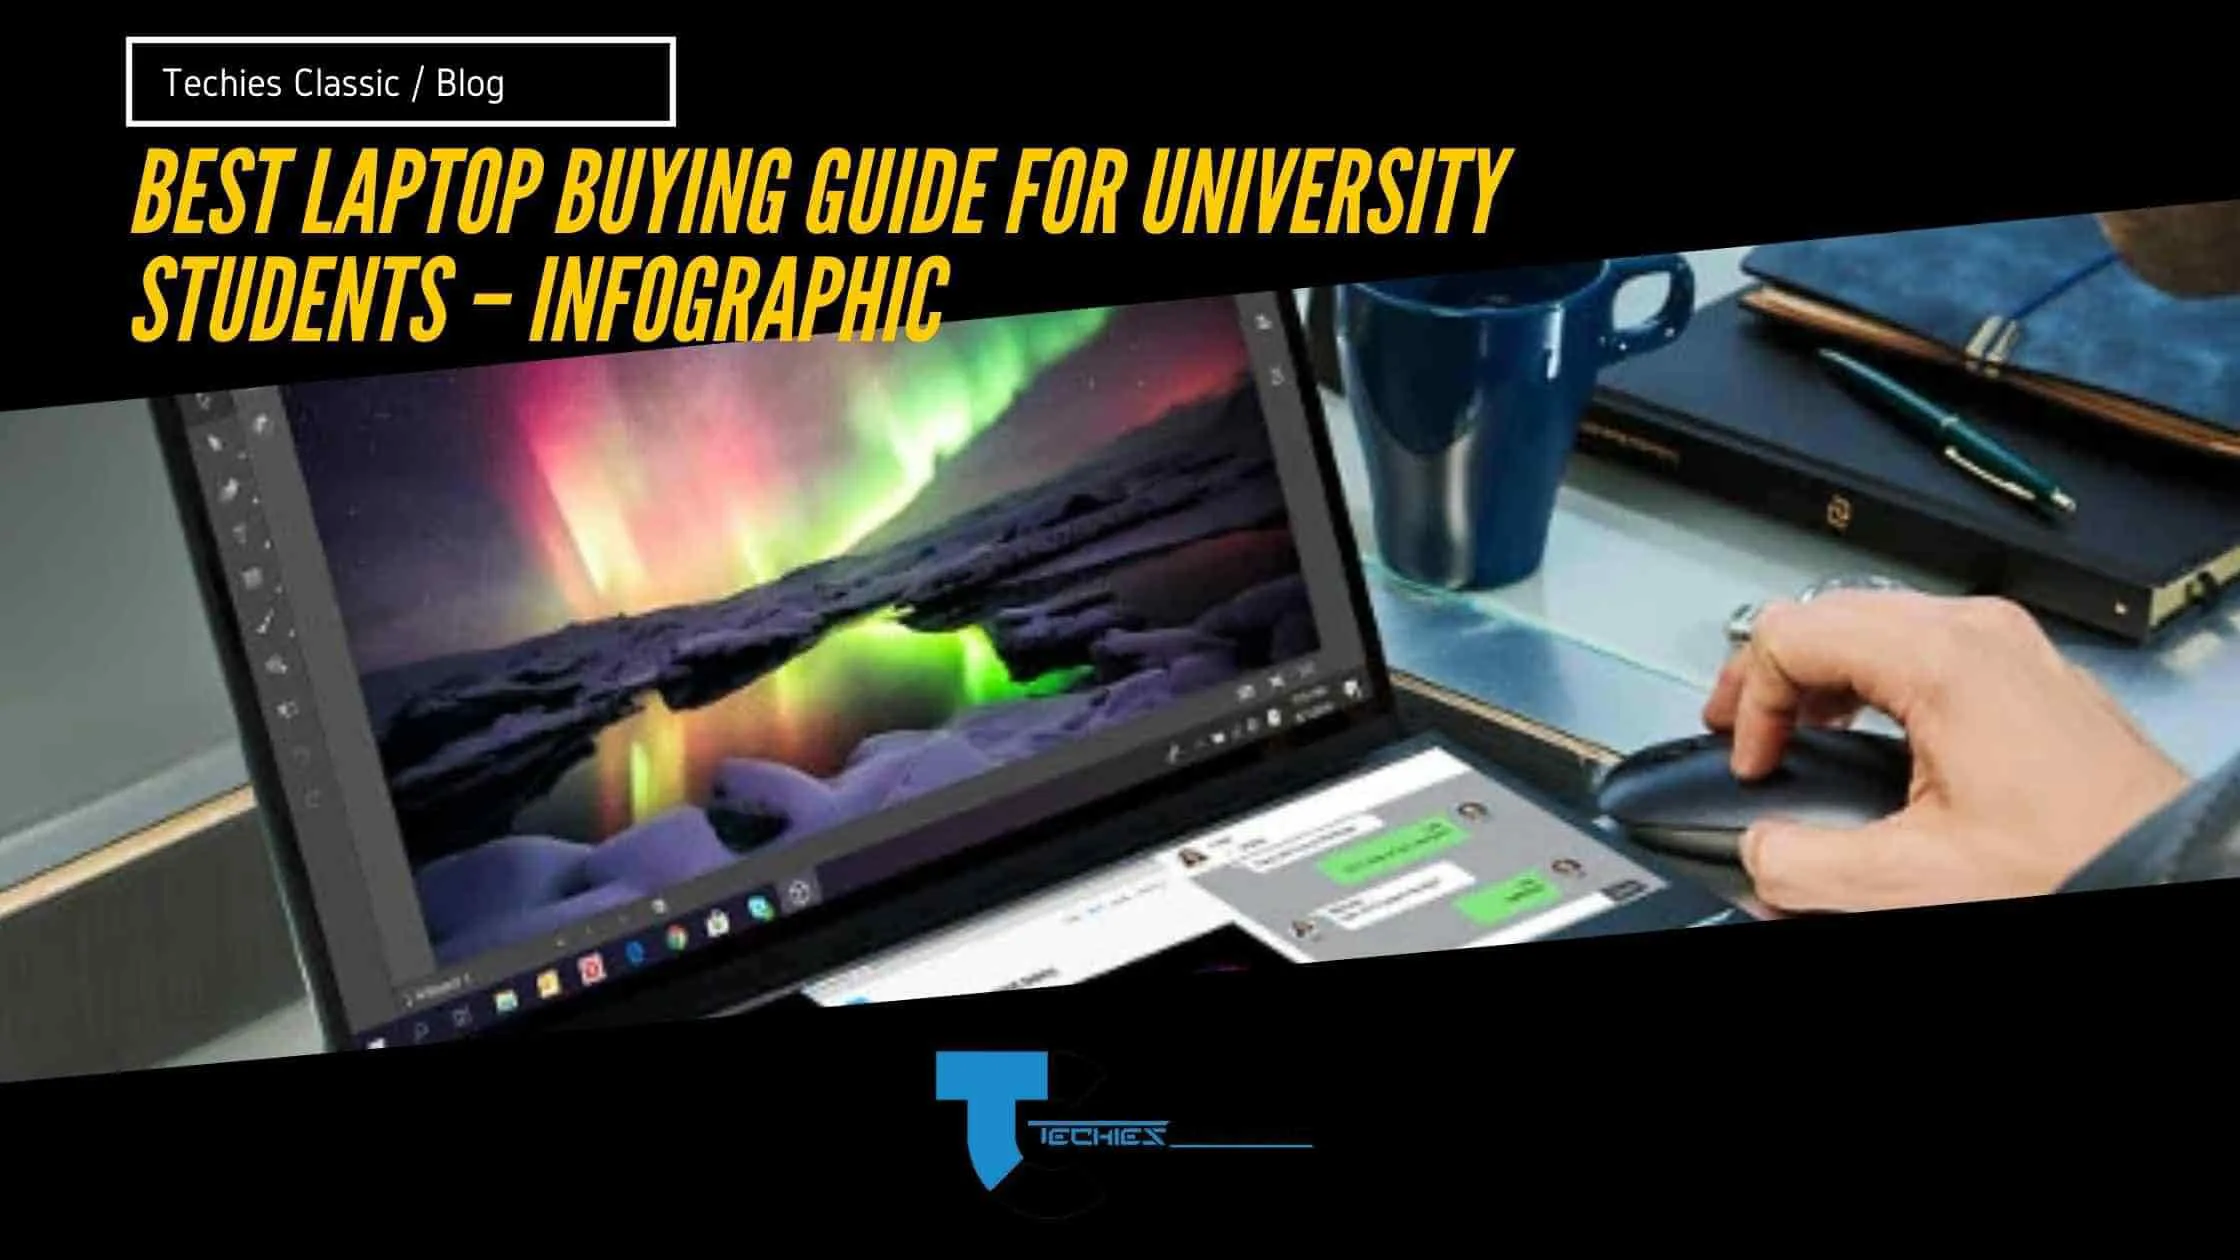 Best laptop buying guide for university students – Infographic